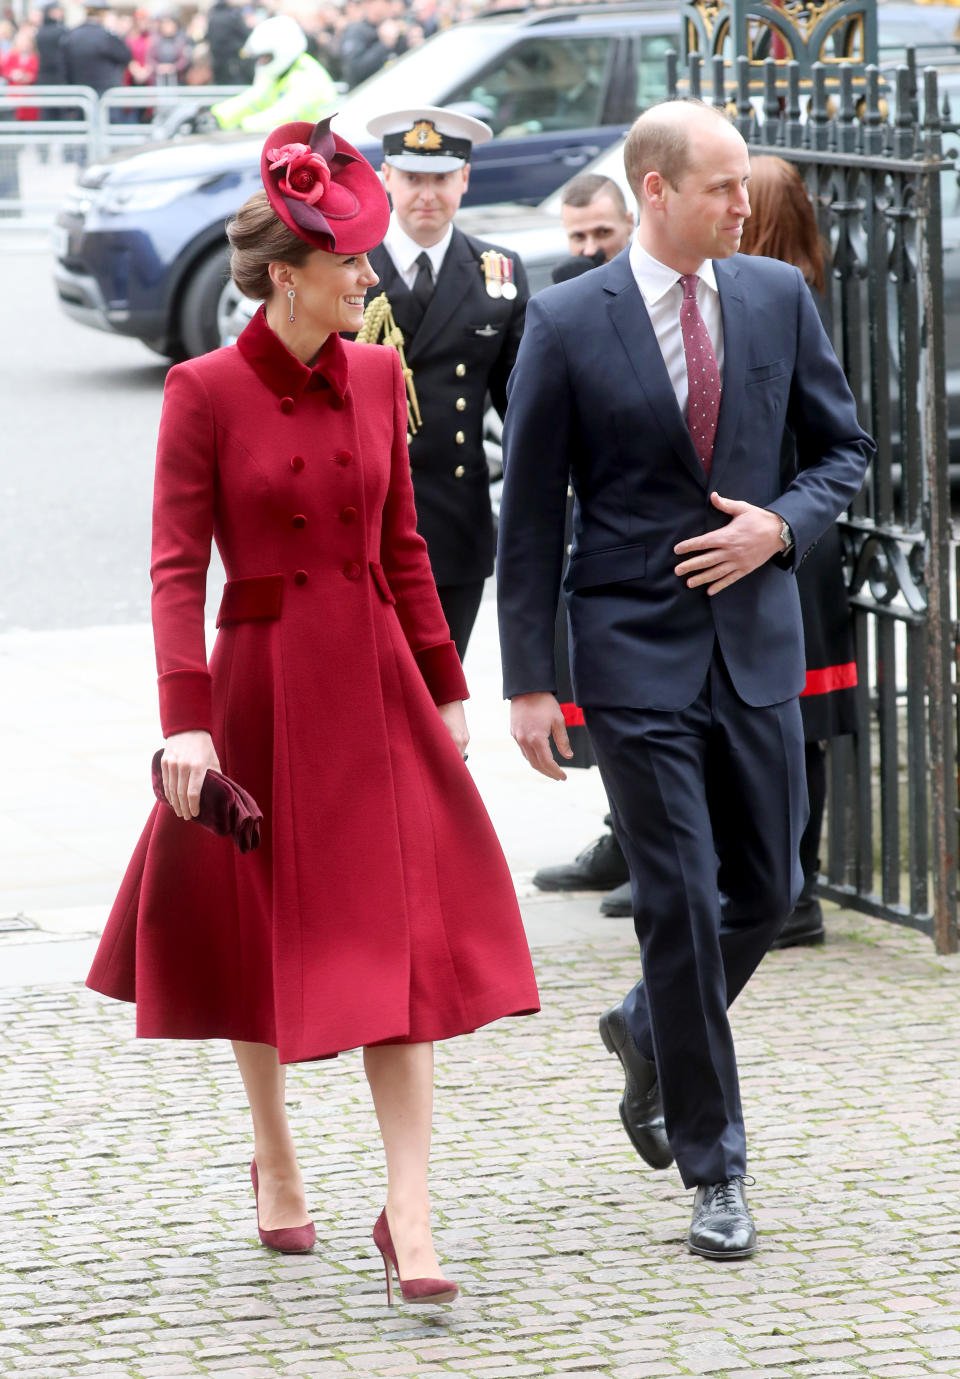 LONDON, ENGLAND - MARCH 09: Catherine, Duchess of Cambridge and Prince William, Duke of Cambridge attend the Commonwealth Day Service 2020 at Westminster Abbey on March 09, 2020 in London, England. The Commonwealth represents 2.4 billion people and 54 countries, working in collaboration towards shared economic, environmental, social and democratic goals. (Photo by Chris Jackson/Getty Images)